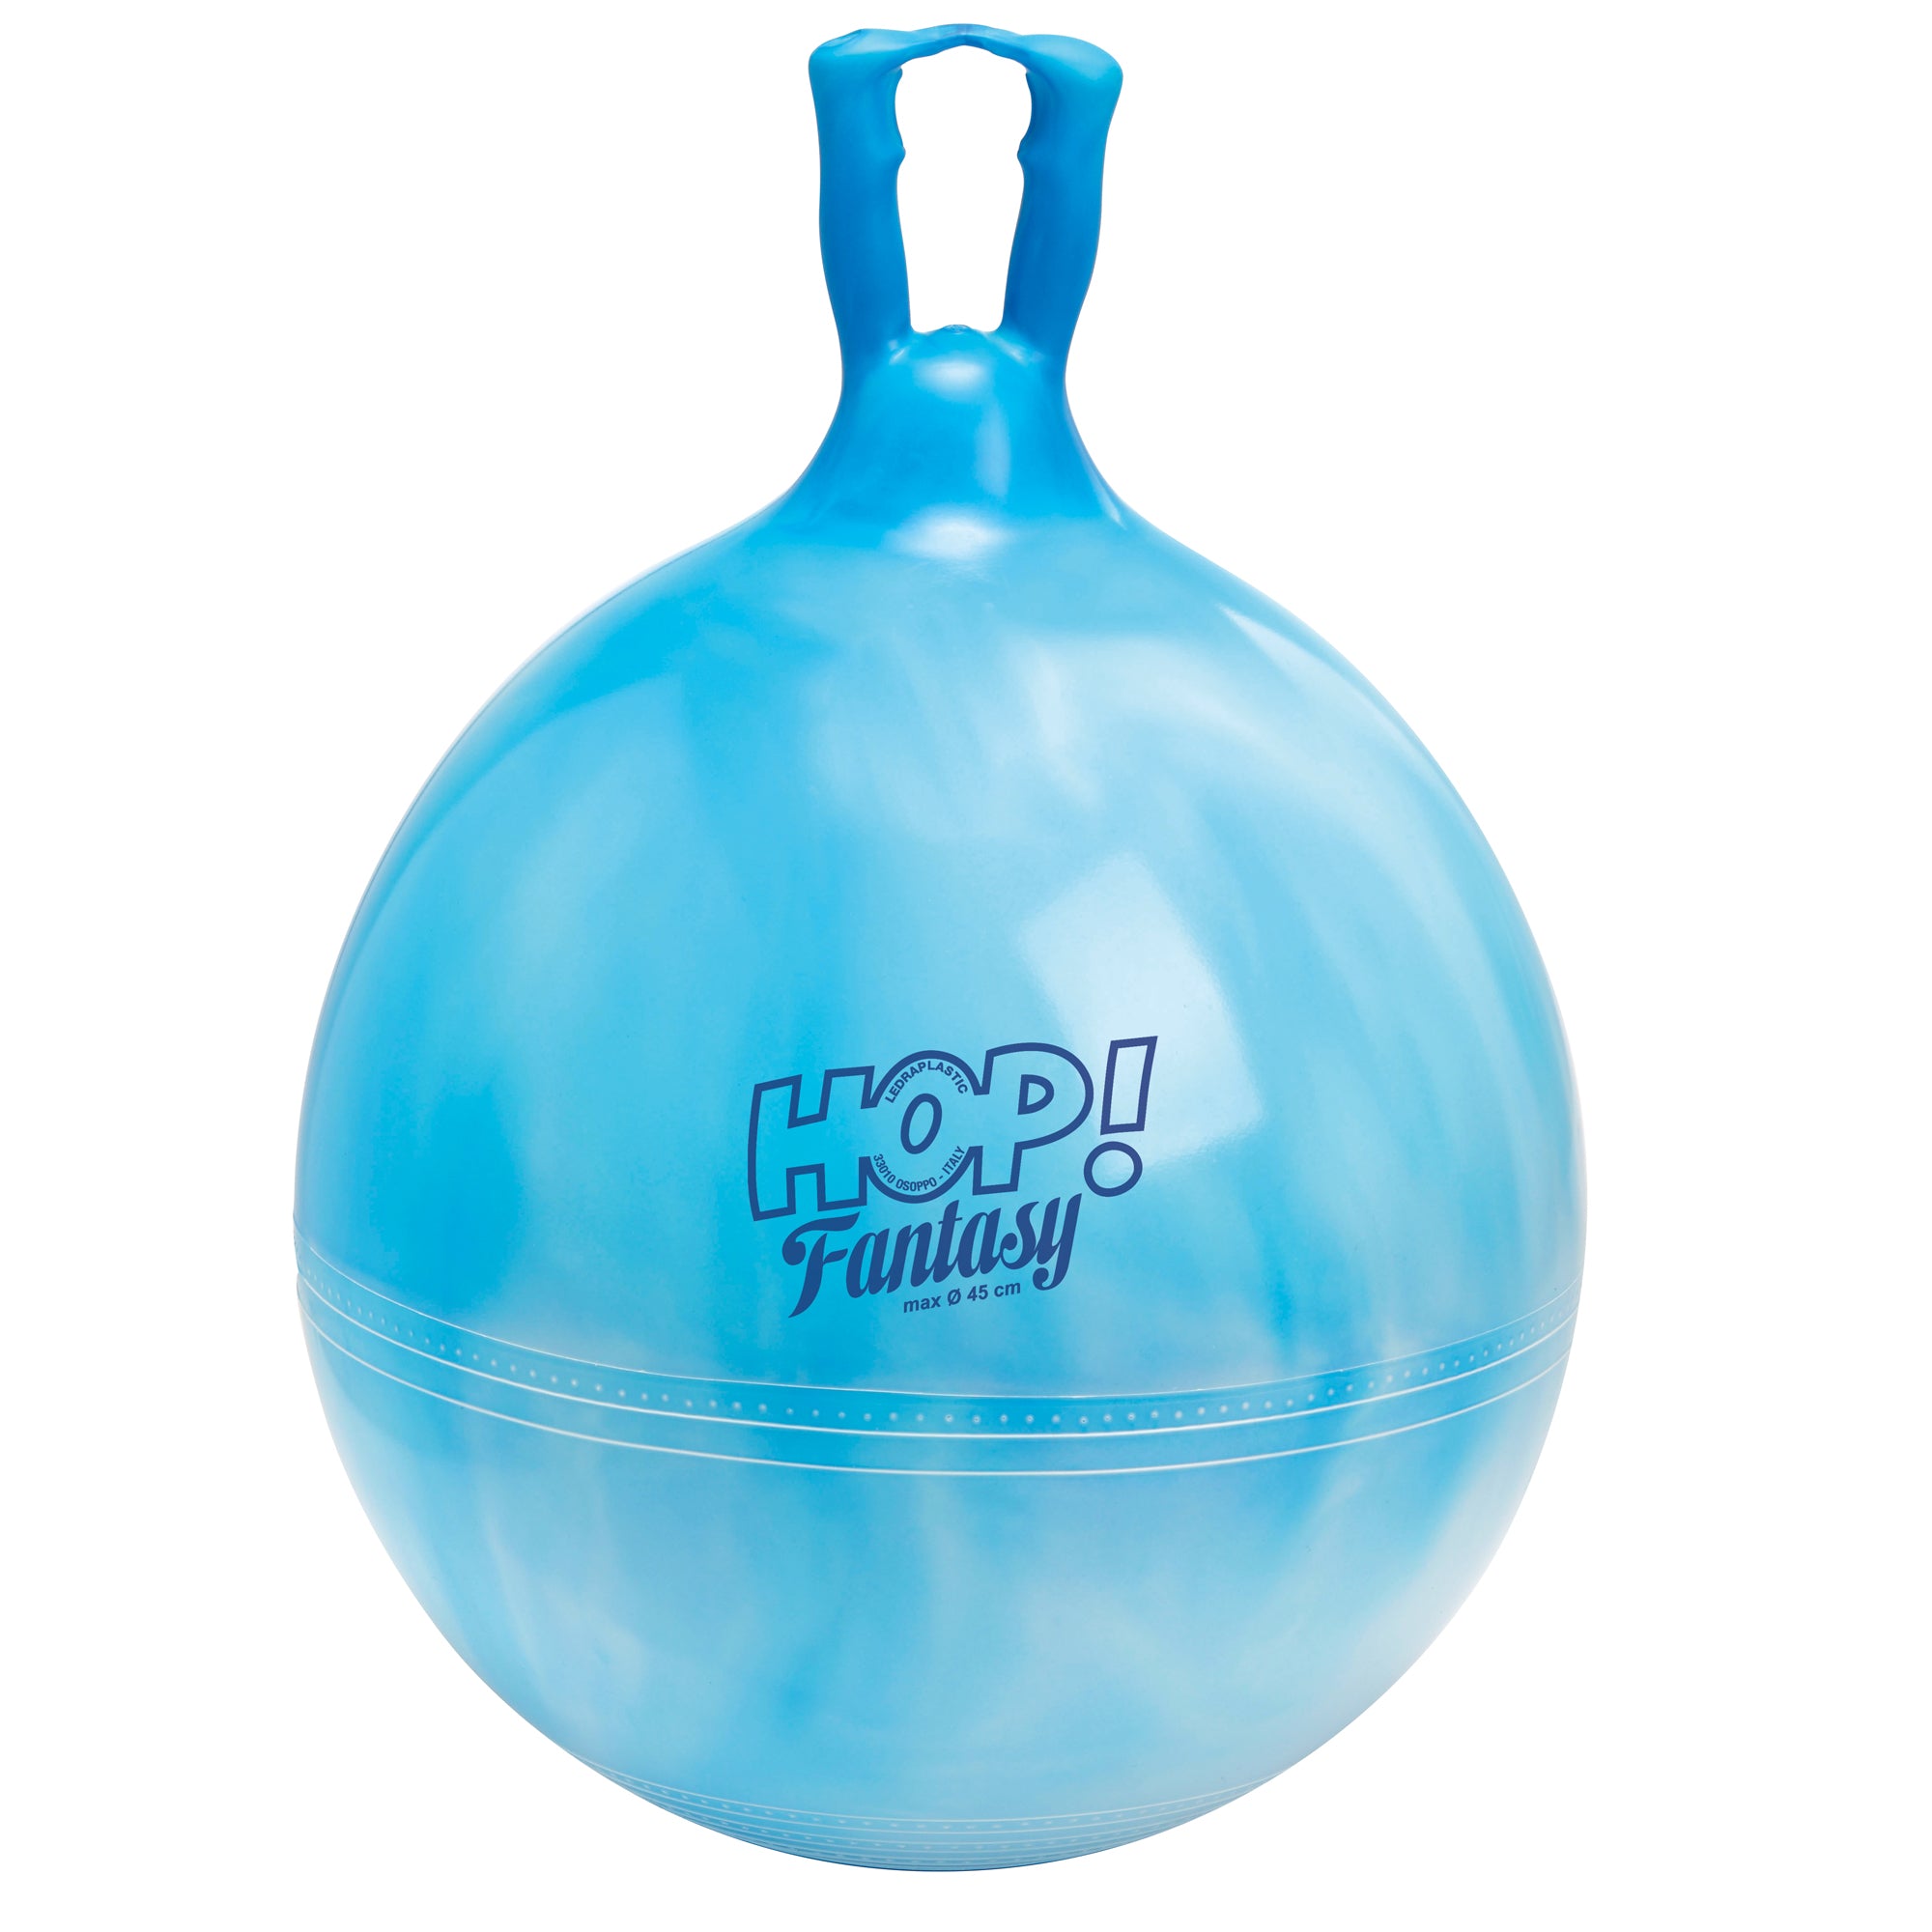 The Hop Ball is a dynamic toy, which promotes balance and coordination in children while providing a fun workout. The soft one-piece handgrip ensures the safest bouncing as it is made of the same material as the ball. Thanks to this special handle, the Gymnic high quality hopper can be included in motor activity programs for innovative and more involving exercises